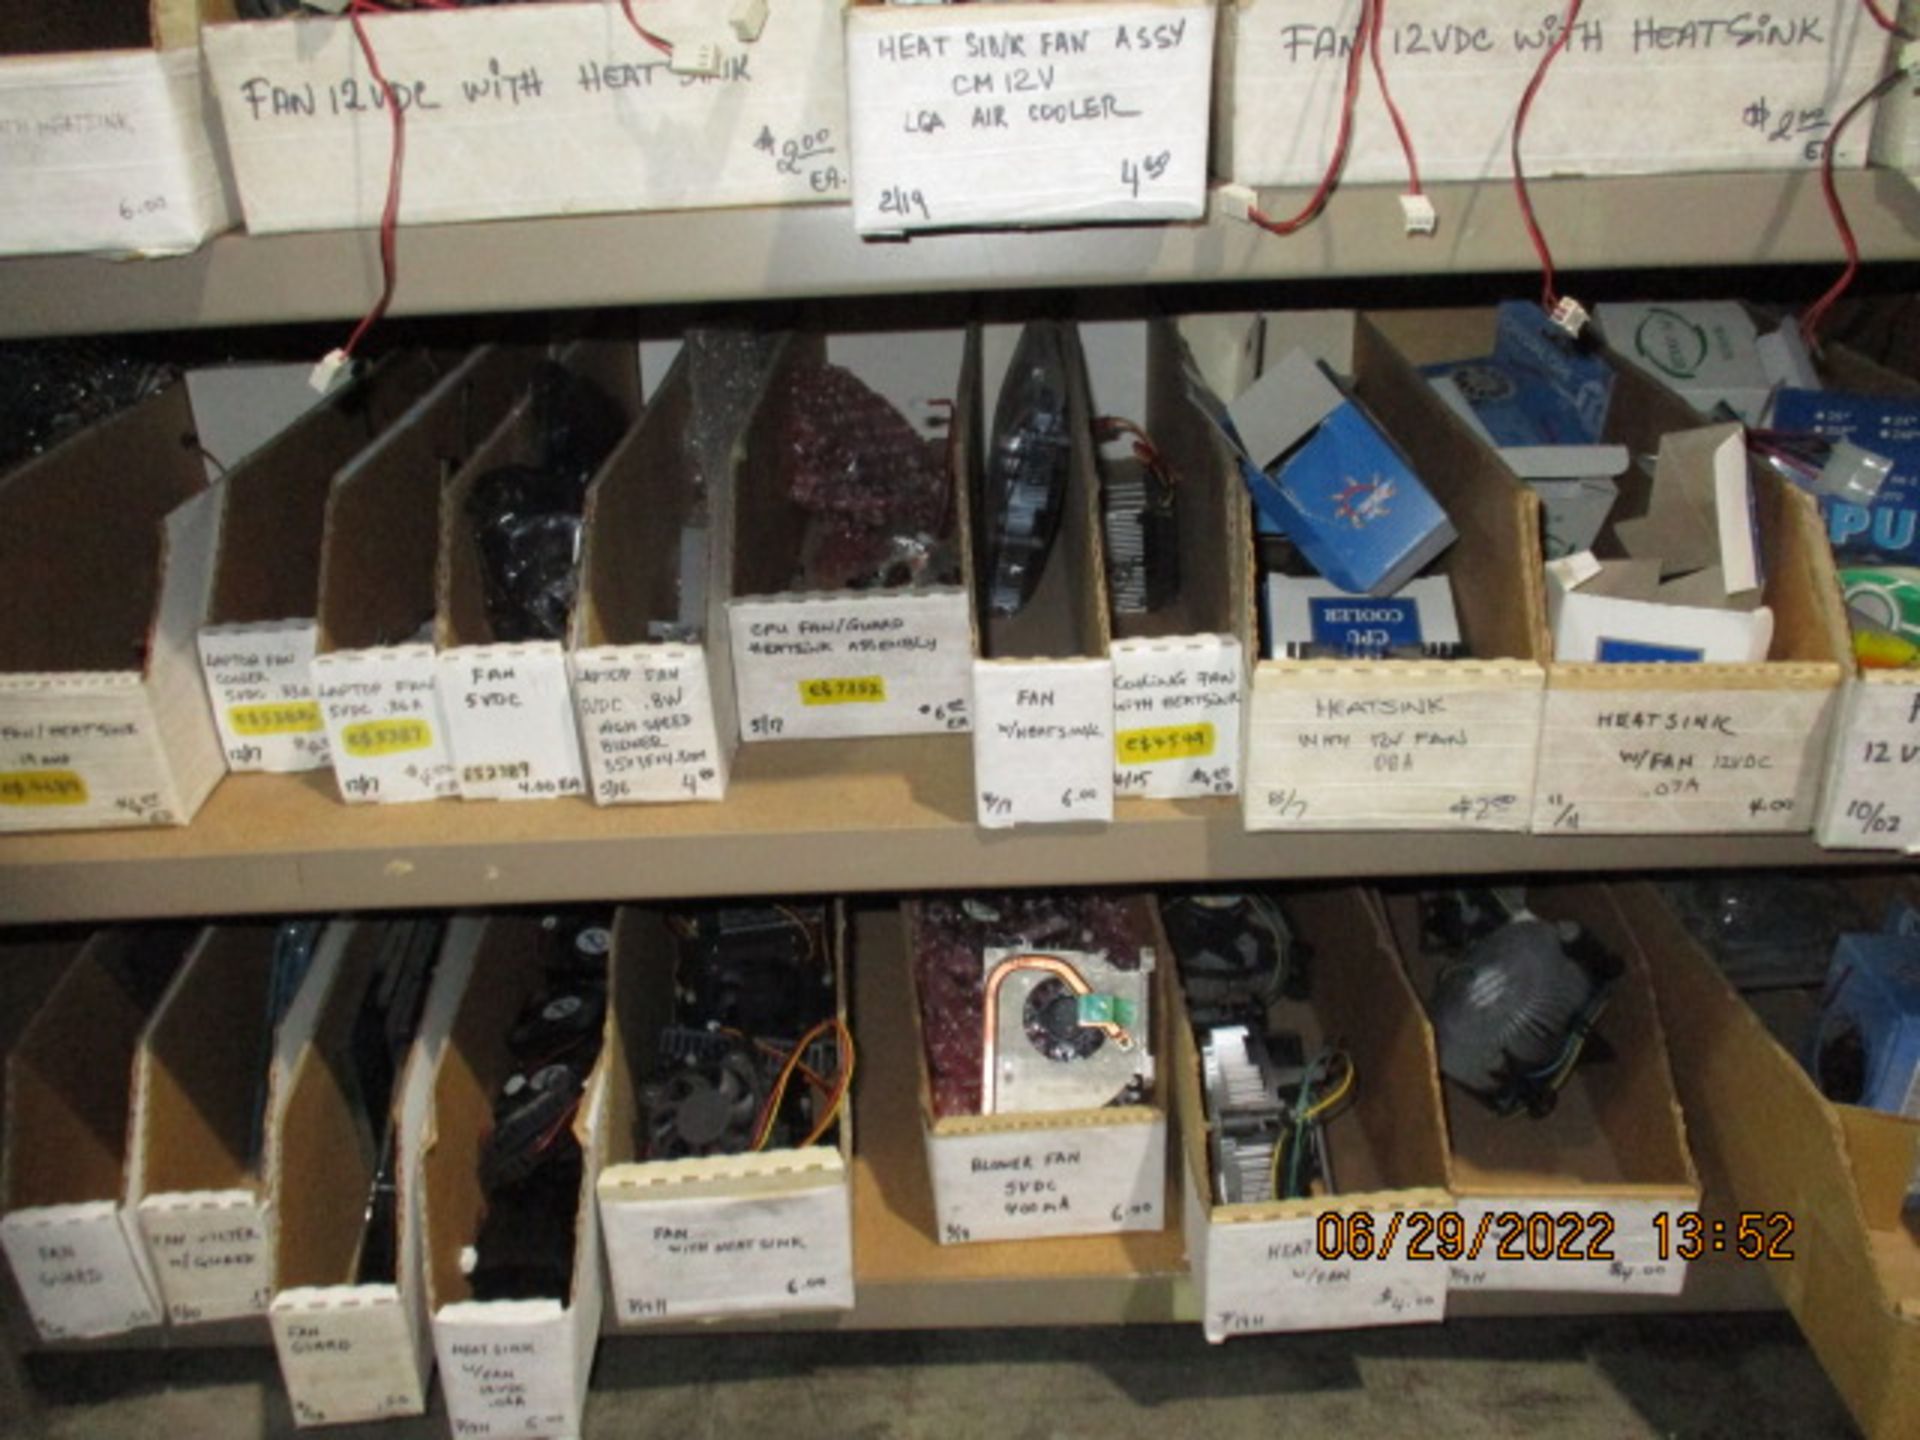 CONTENTS OF SHELVING UNIT CONSISTING OF INTEL CORE 2 DUO DESKTOP AND FANS - Image 12 of 13